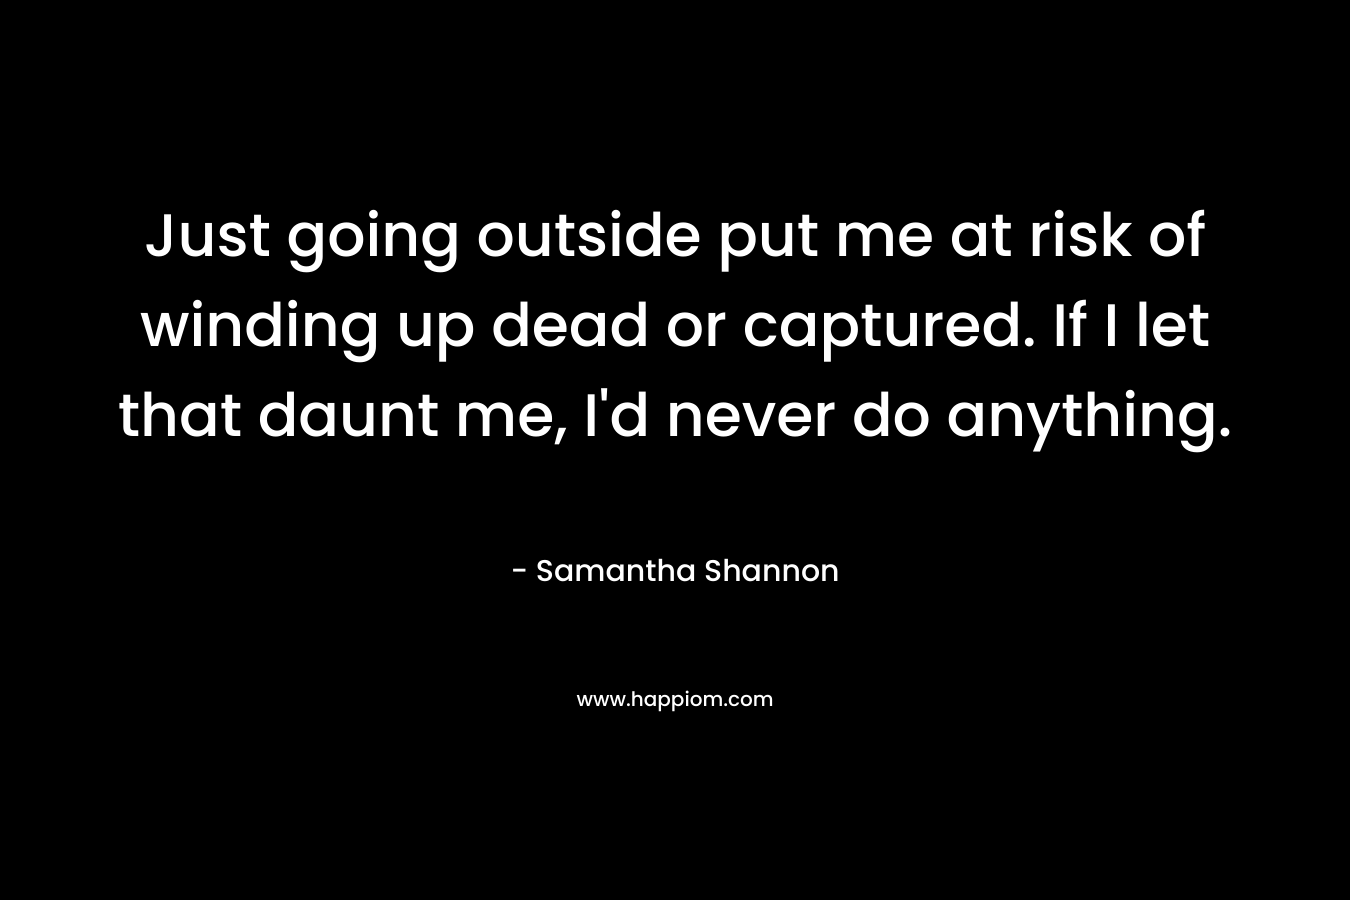 Just going outside put me at risk of winding up dead or captured. If I let that daunt me, I’d never do anything. – Samantha Shannon